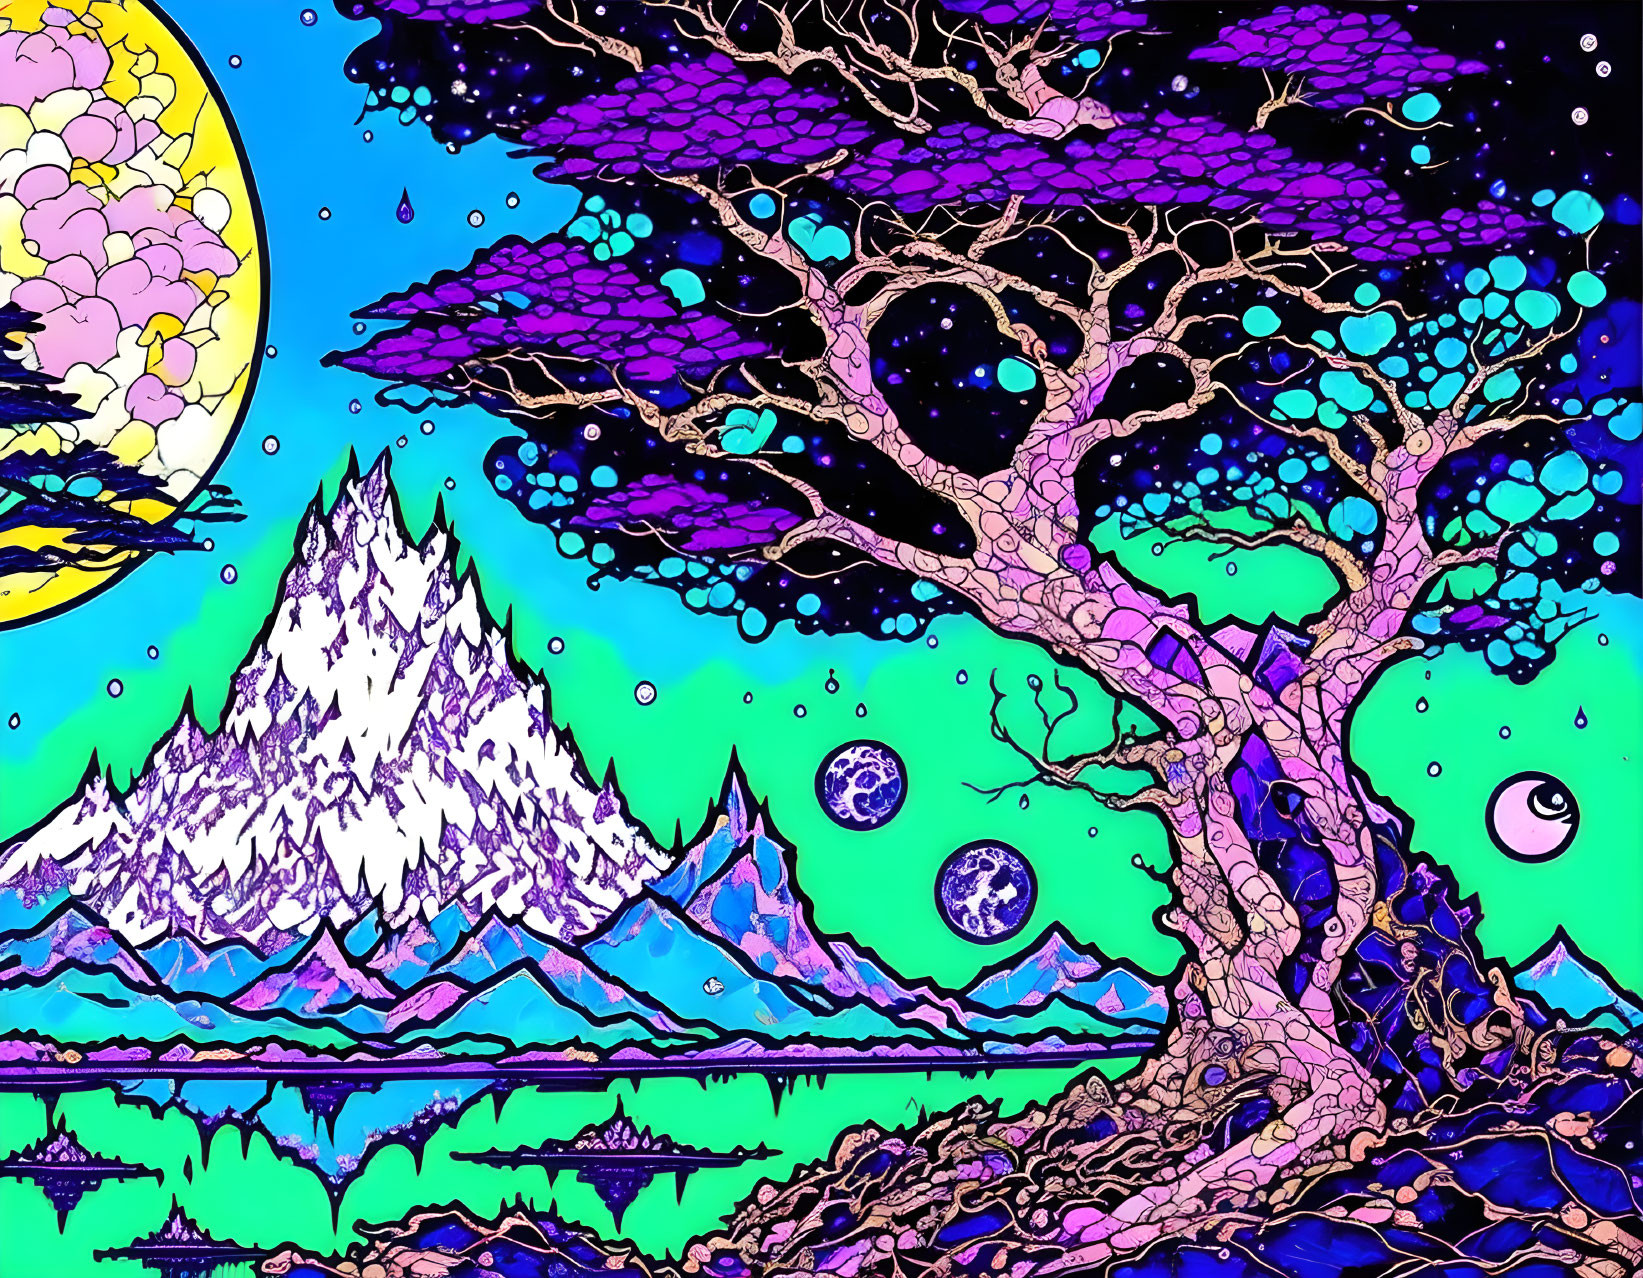 Colorful Psychedelic Tree Illustration with Mountain Range and Moon